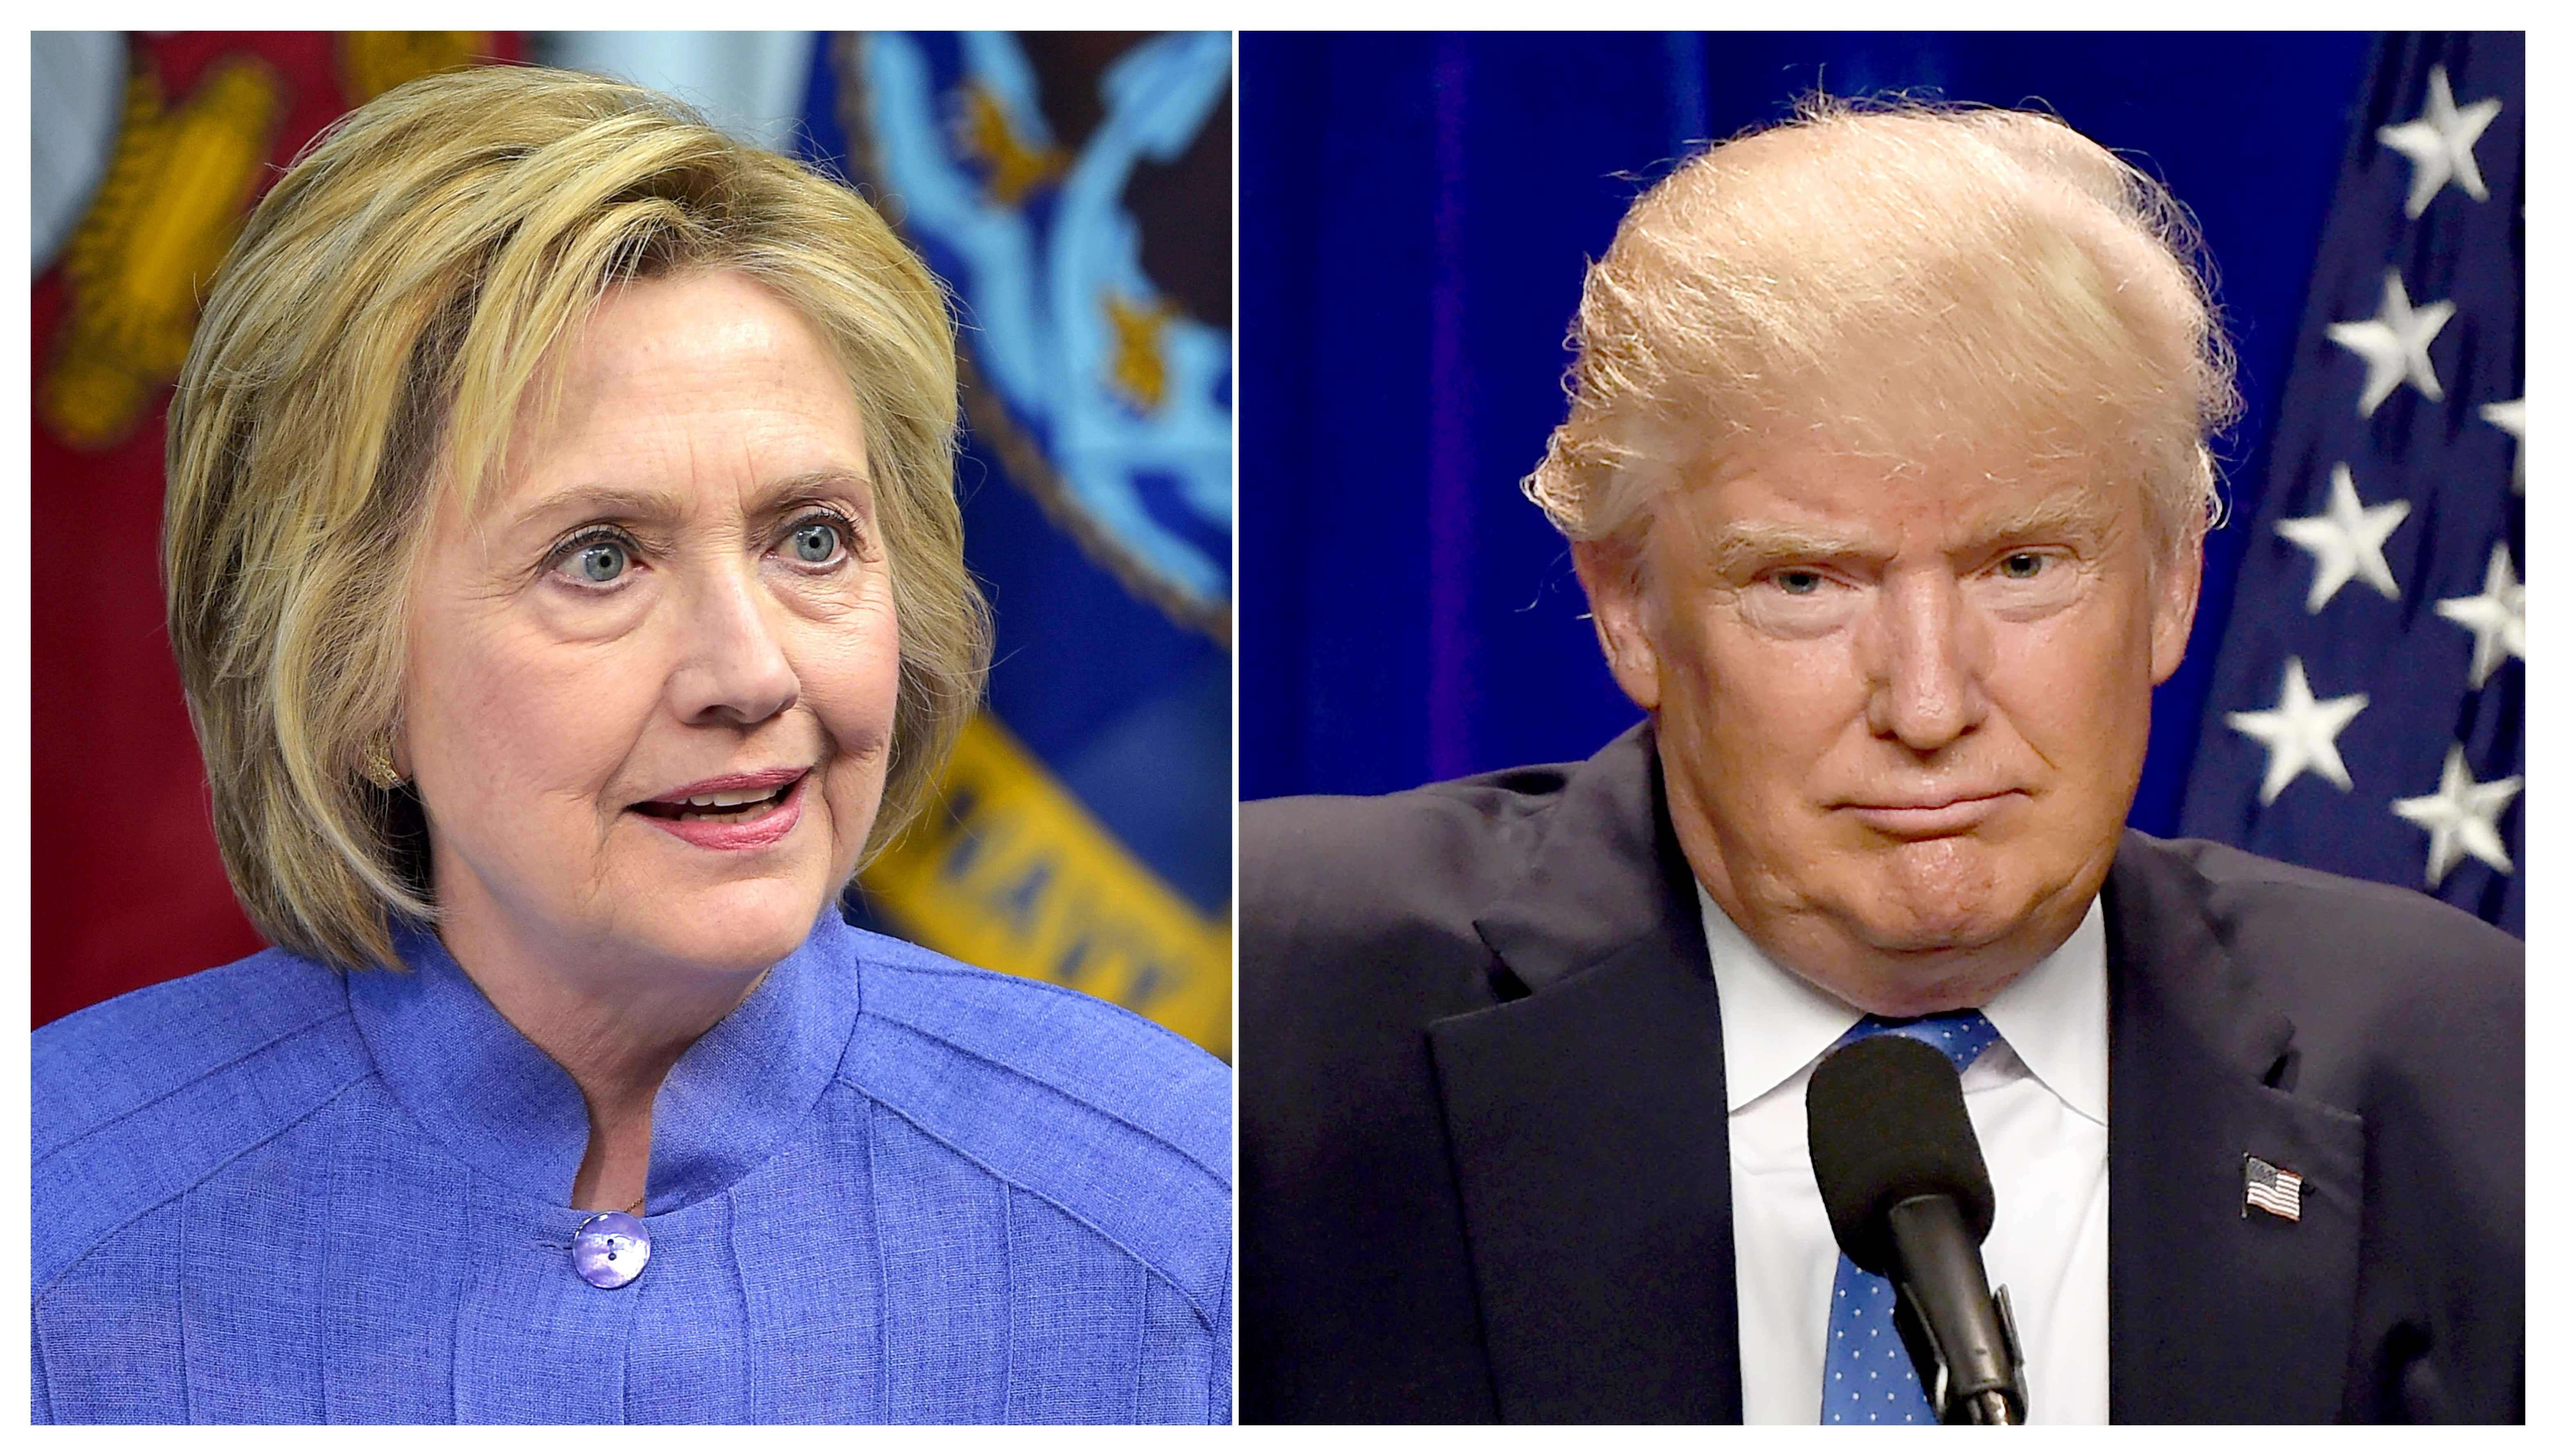 Clinton takes lead over Trump, new polls show